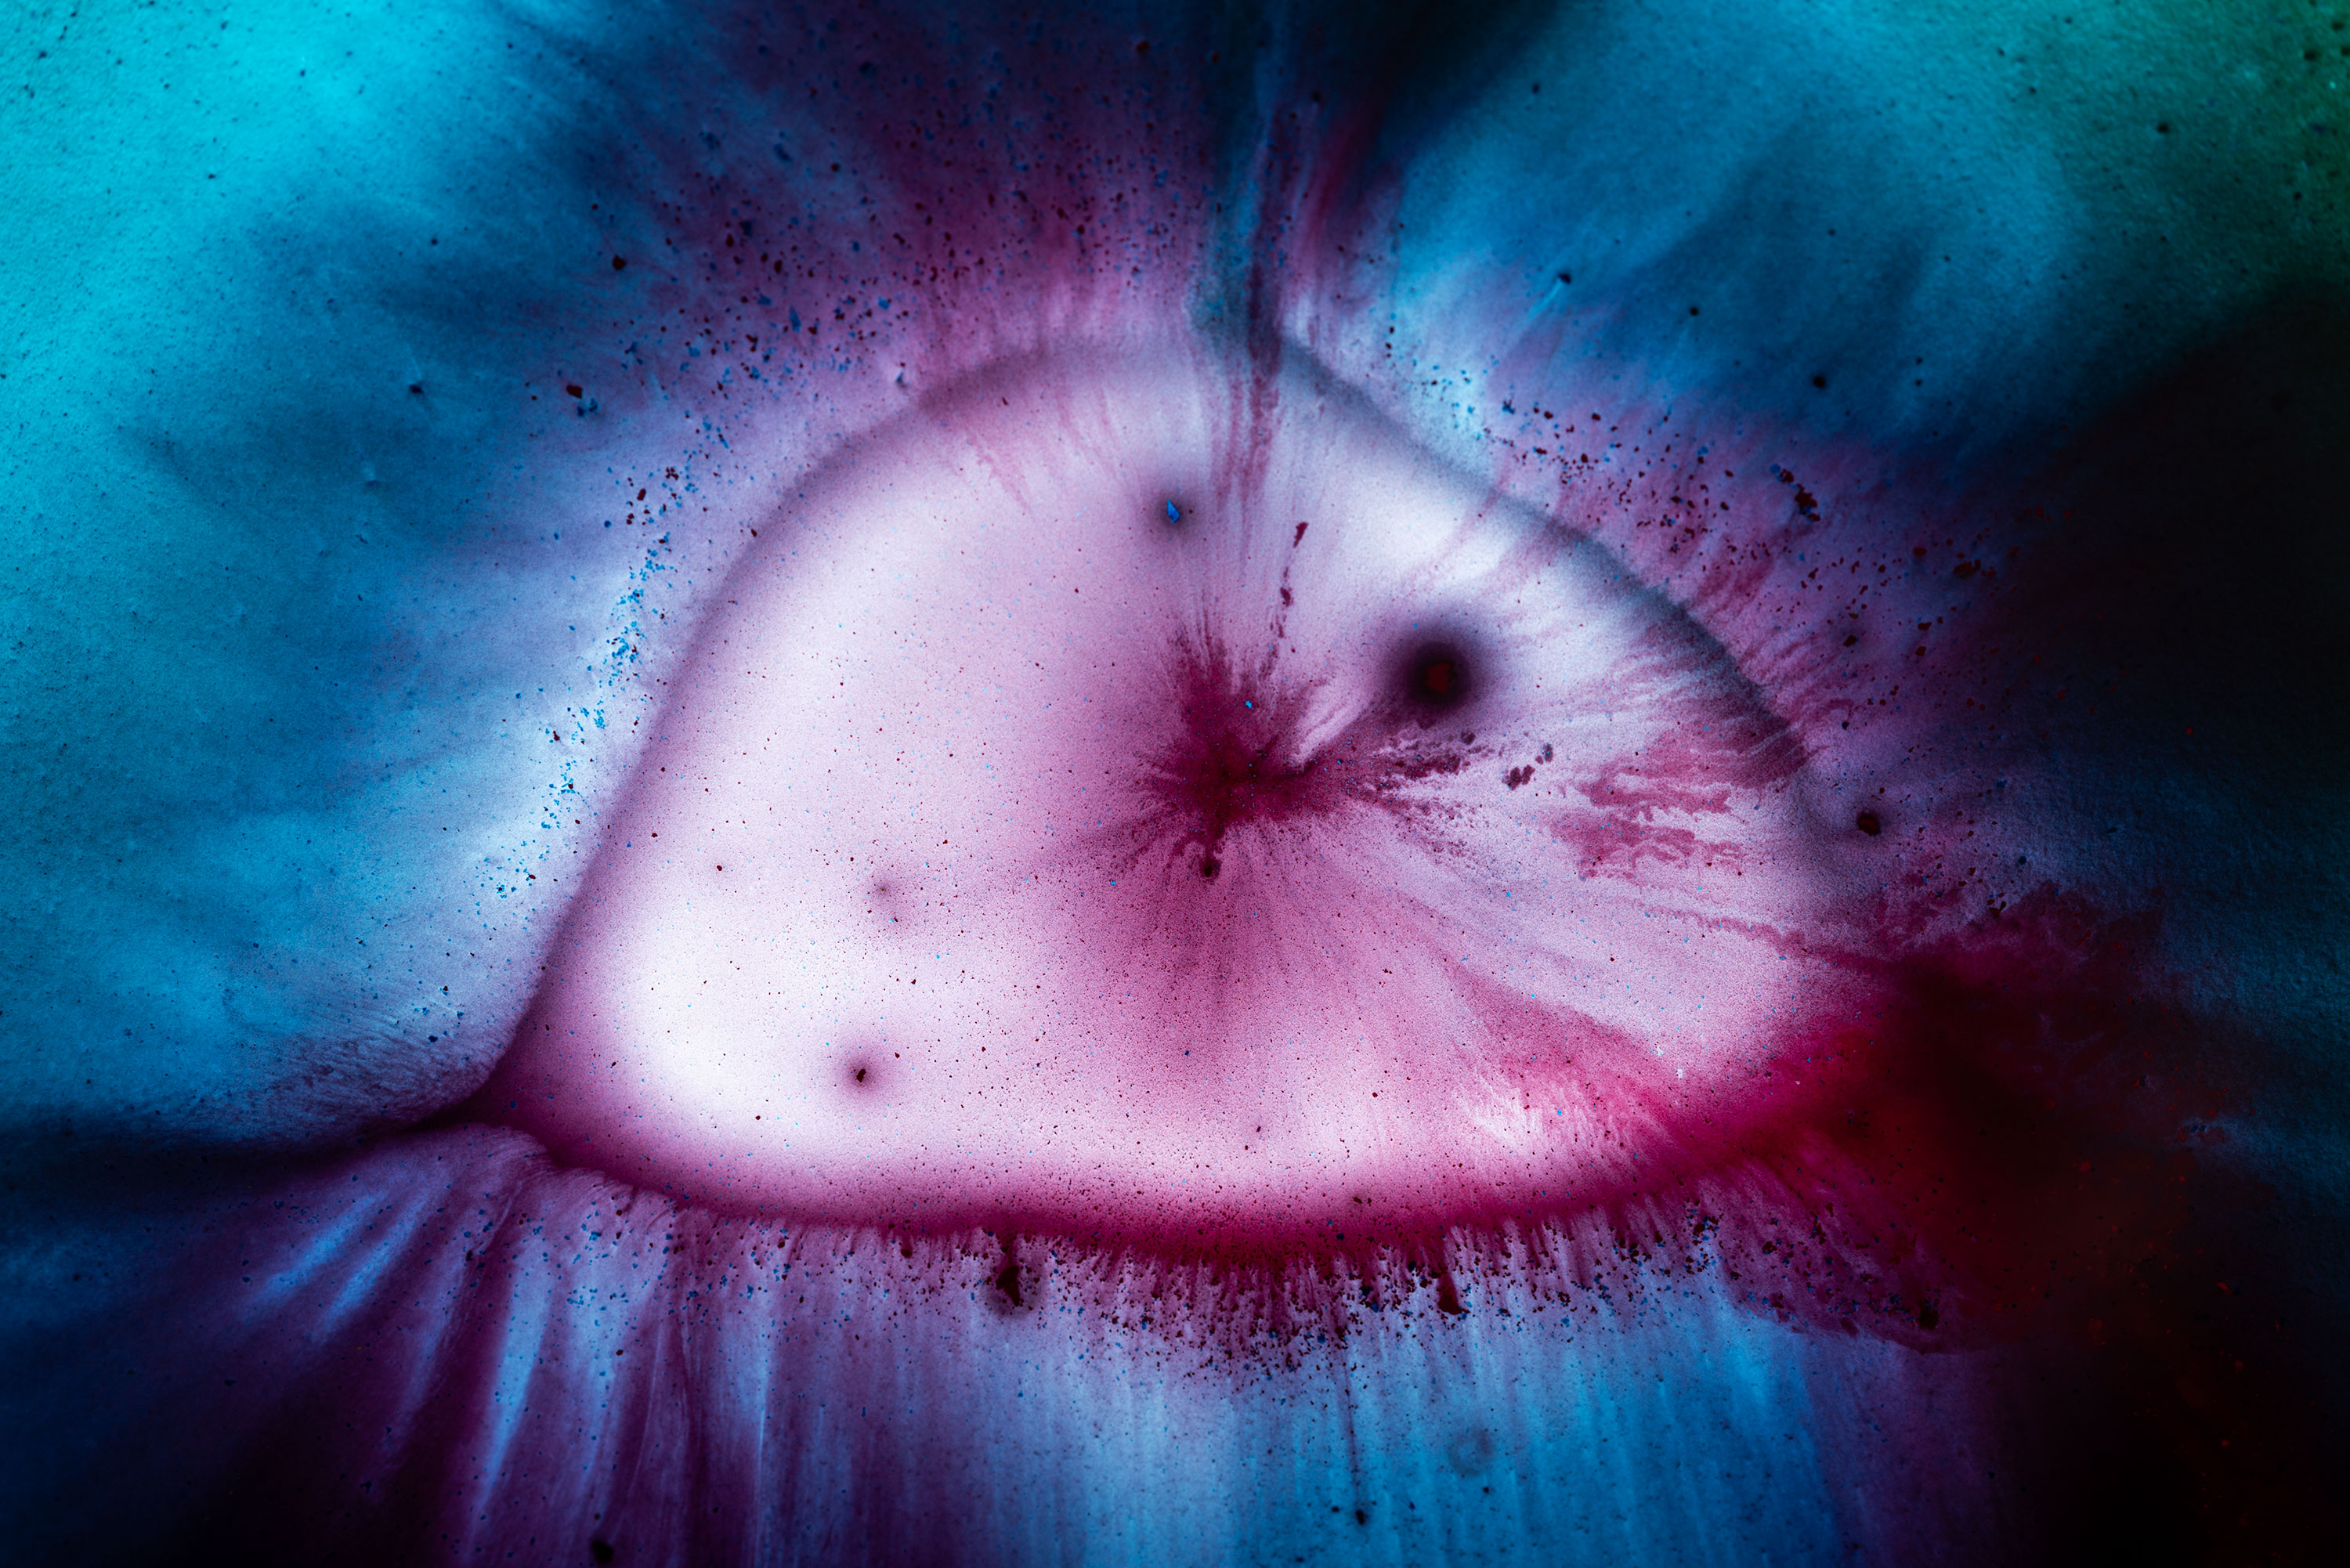 Cyan and magenta watercolor close-up photography. Image by Jennifer Esseiva.